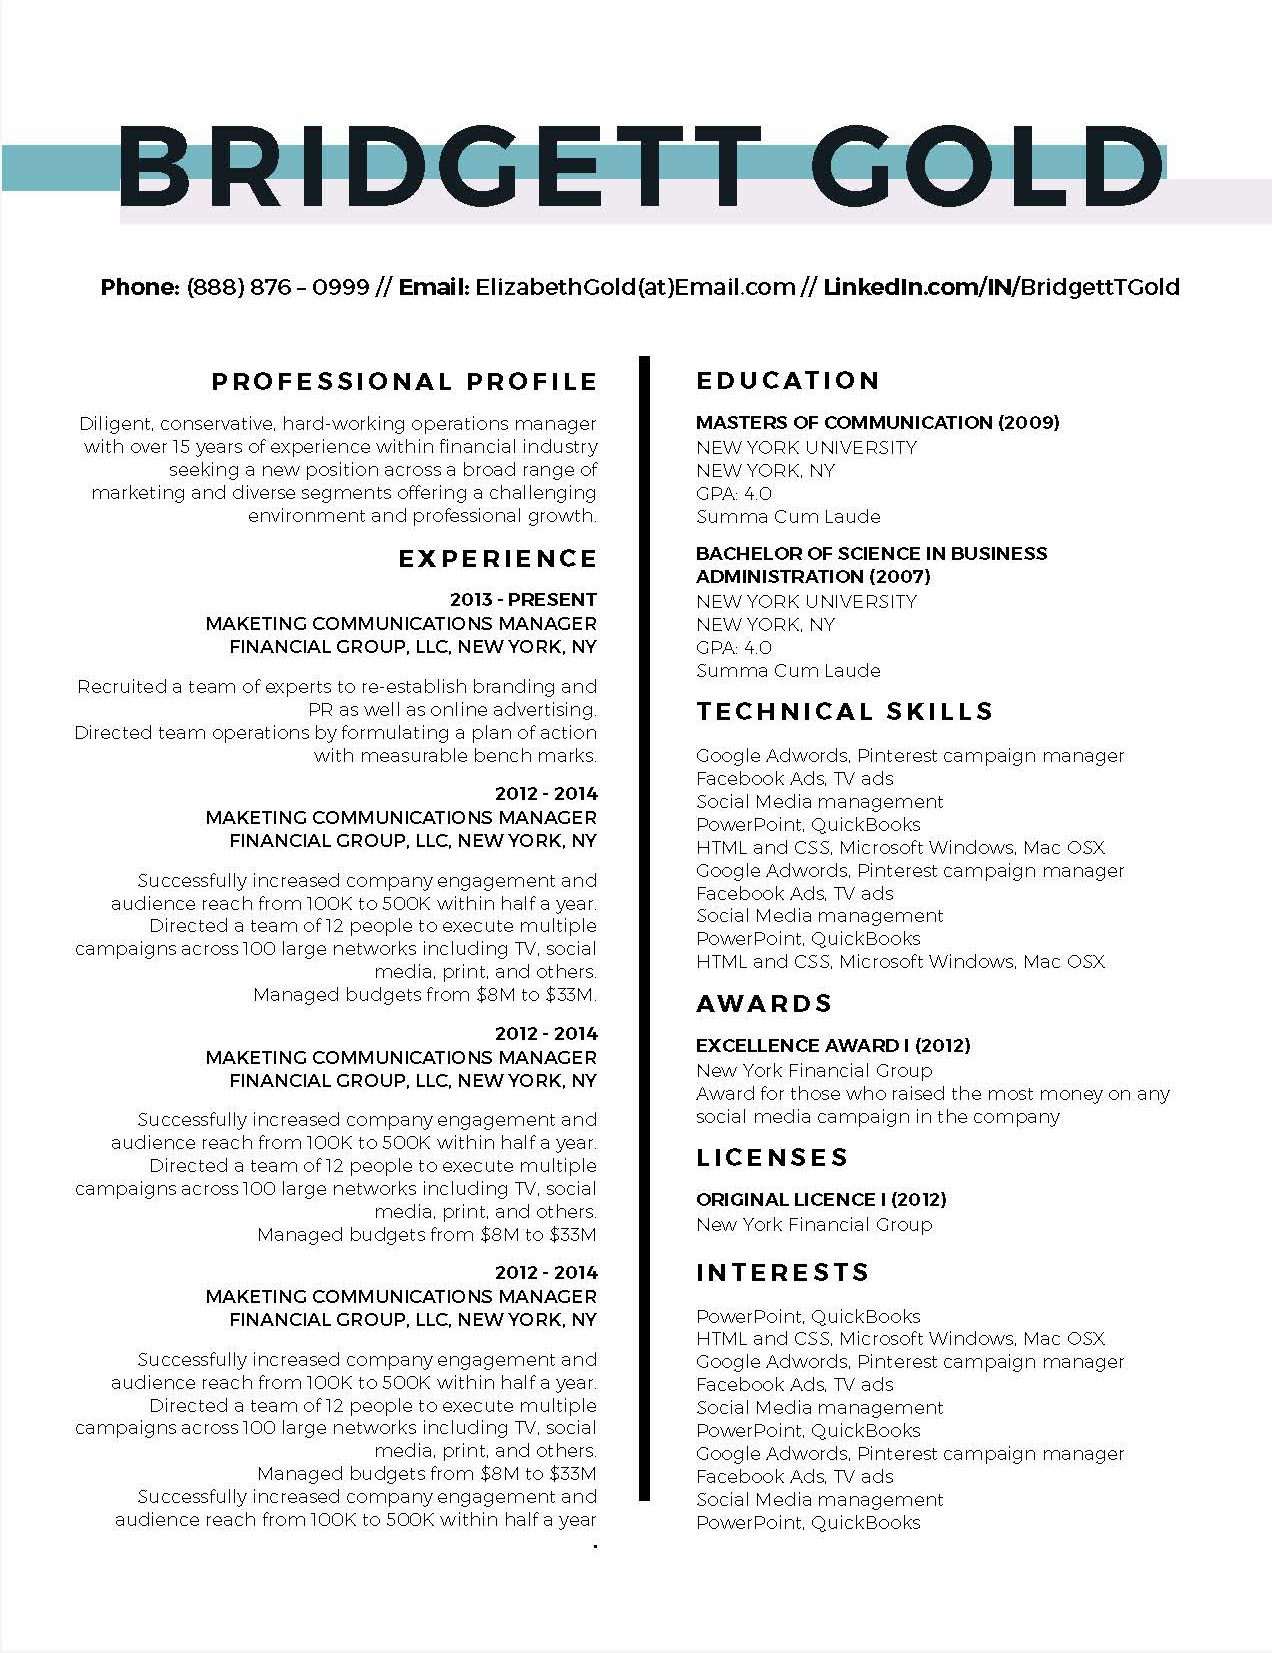 Bridgett Gold - Downloadable Resume + Cover Template and Cover Letter Template for Microsoft Word and Apple Pages. This cover letter template is perfect for anyone in the fashion field. The template’s design is a modern, unique, colorful, and professional. WE SWEAT THE DETAILS, SO YOU DON’T HAVE TO Stand Out Shop resume templates for Microsoft Word and Apple Pages will help you design a modern and professional resume in minutes! Simply download, open in Microsoft Word or Apple Pages, and input your resume’s information. Increase your chances of landing your dream job with a job winning, modern, simple, and scannable resume template for Microsoft Word and Apple Pages. Creating a resume shouldn’t suck Simply download a resume template from Stand Out Shop, enter your information in Microsoft Word or Apple Pages and get a beautifully formatted resume in seconds. Create a unique and vivid resume in minutes. Make an impressive resume. Customize your own layout in Microsoft Word or Apple Pages and introduce yourself in an impressive way. You can download your resume at any time. Stand out from other job seekers with a beautiful professional design.